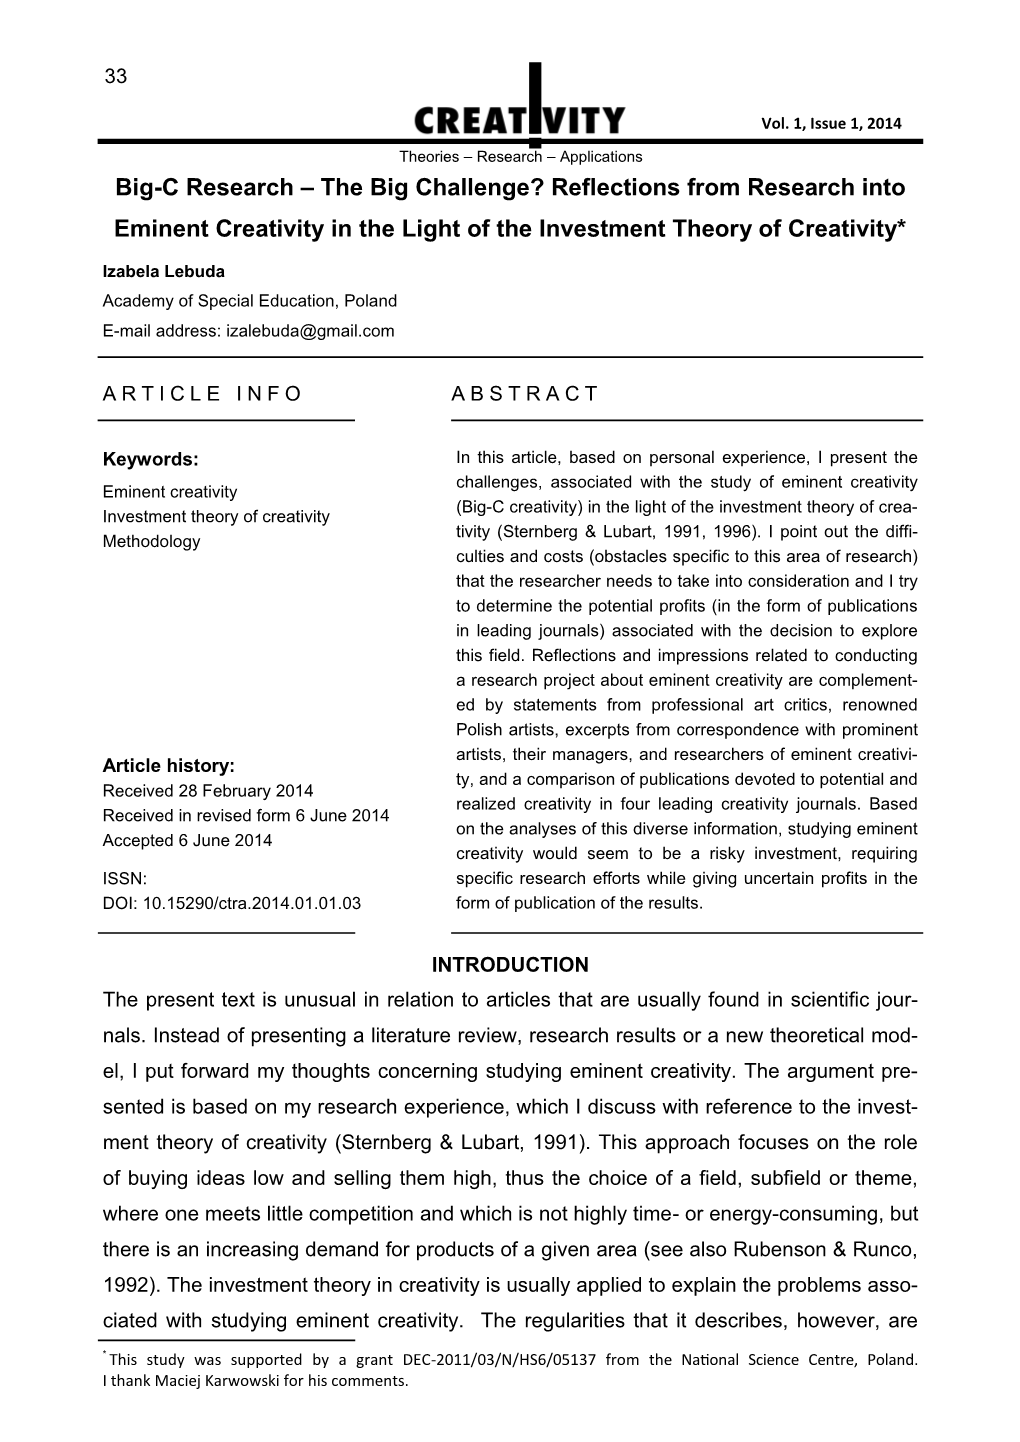 Reflections from Research Into Eminent Creativity in the Light of the Investment Theory of Creativity*